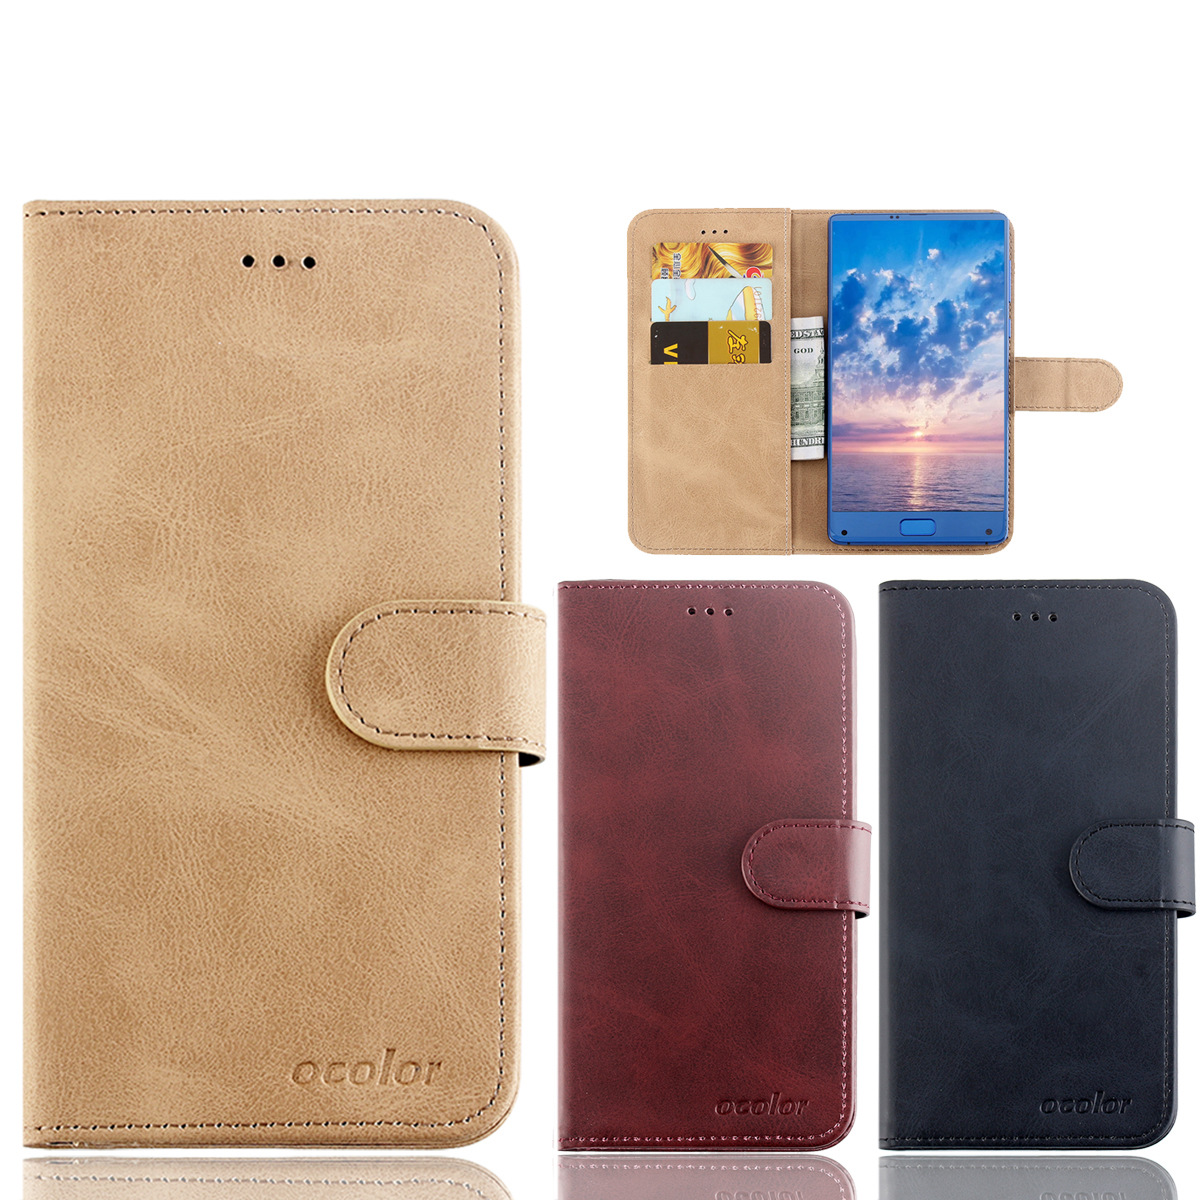 

Bakeey Flip Magnetic Card Slot With Stand PU Leather Case Protective Case For UMIDIGI F1 / UMIDIGI F1 Play